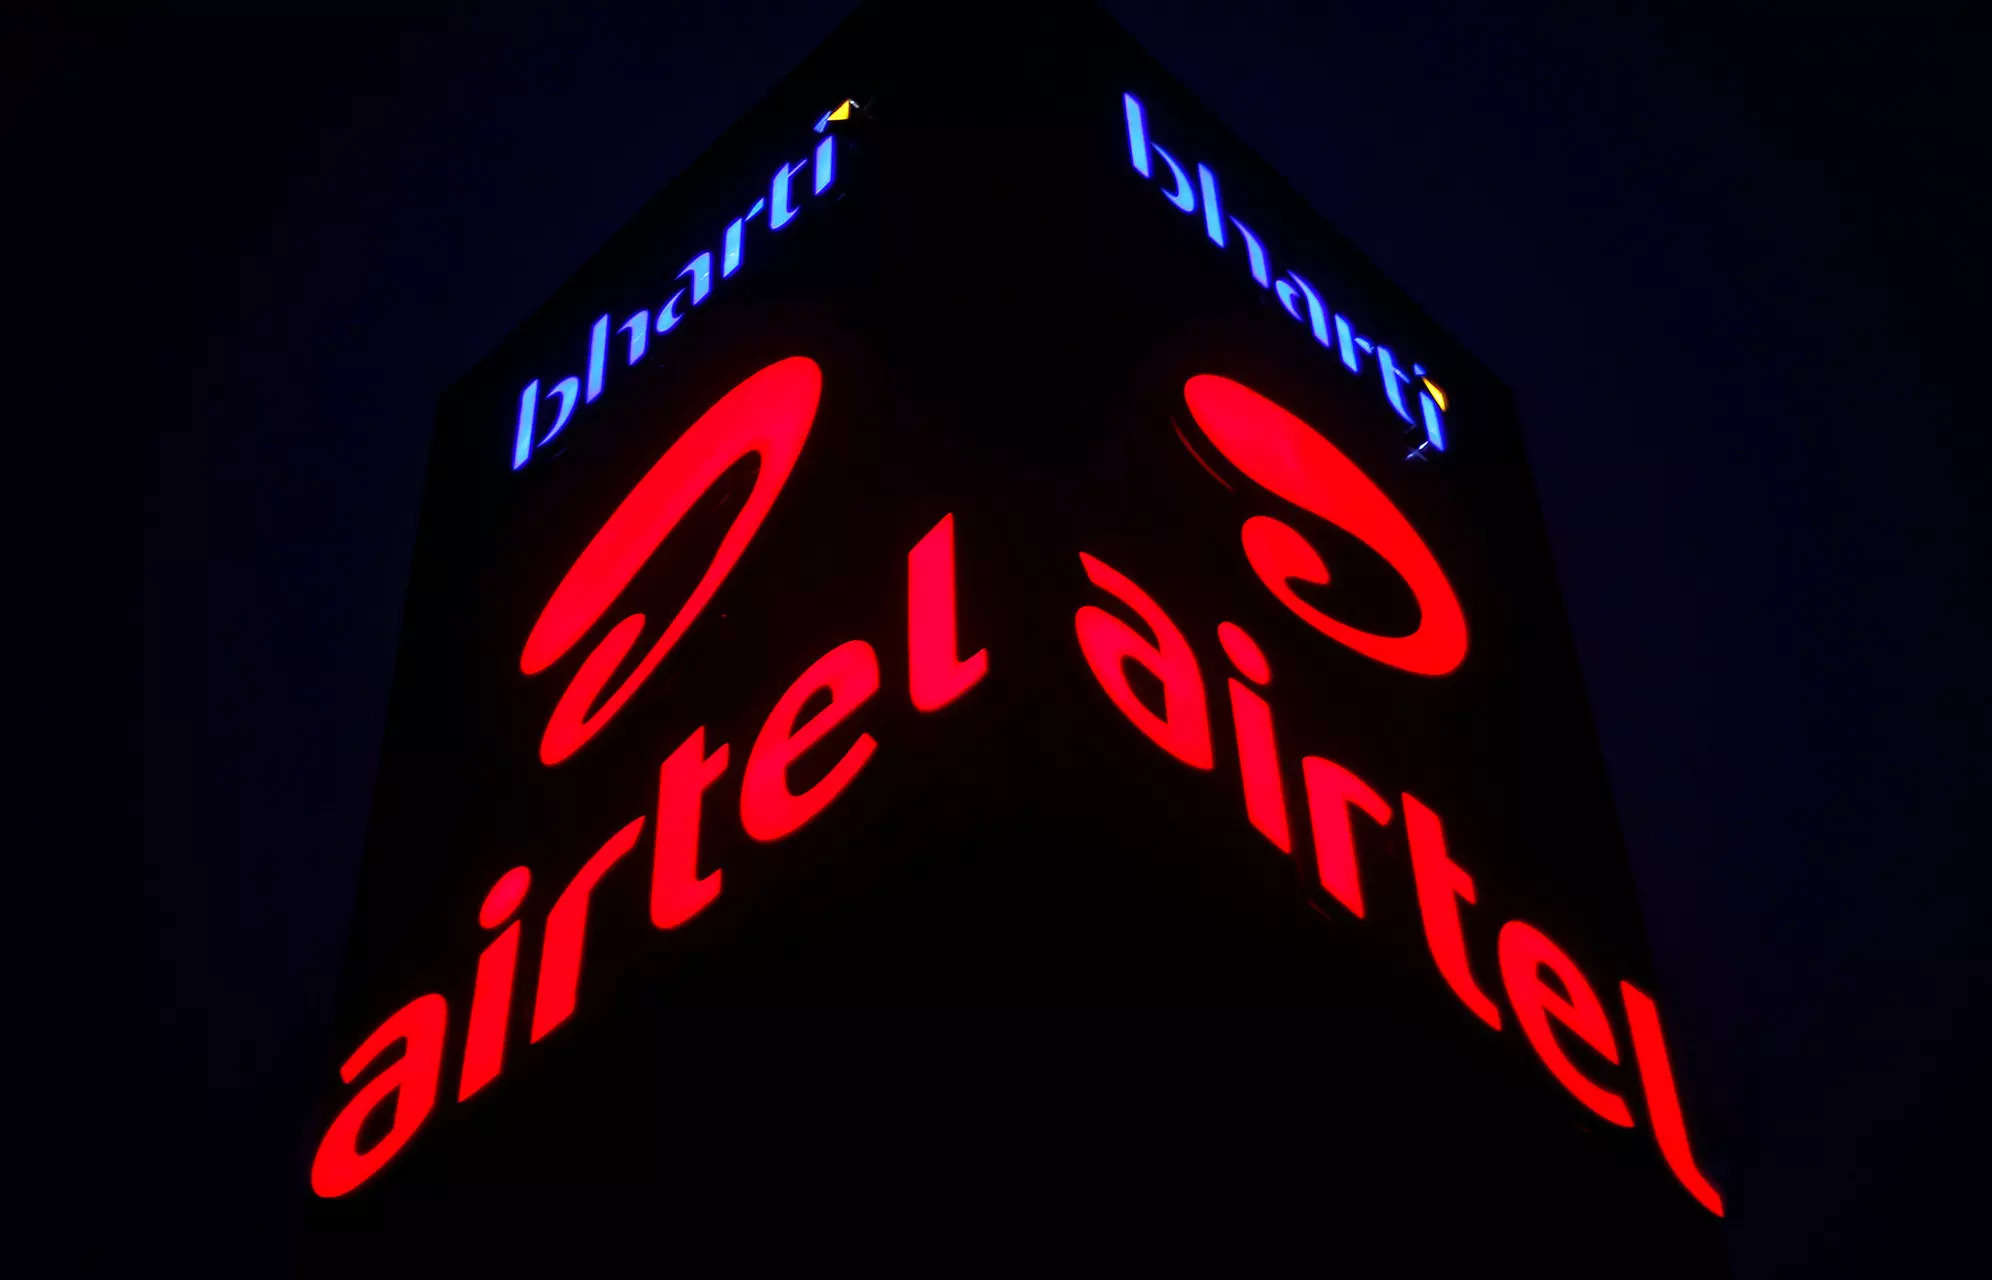 Bharti Airtel Q1 Preview: Revenue may grow by 3% YoY to Rs 38,488 crore, outlook positive 